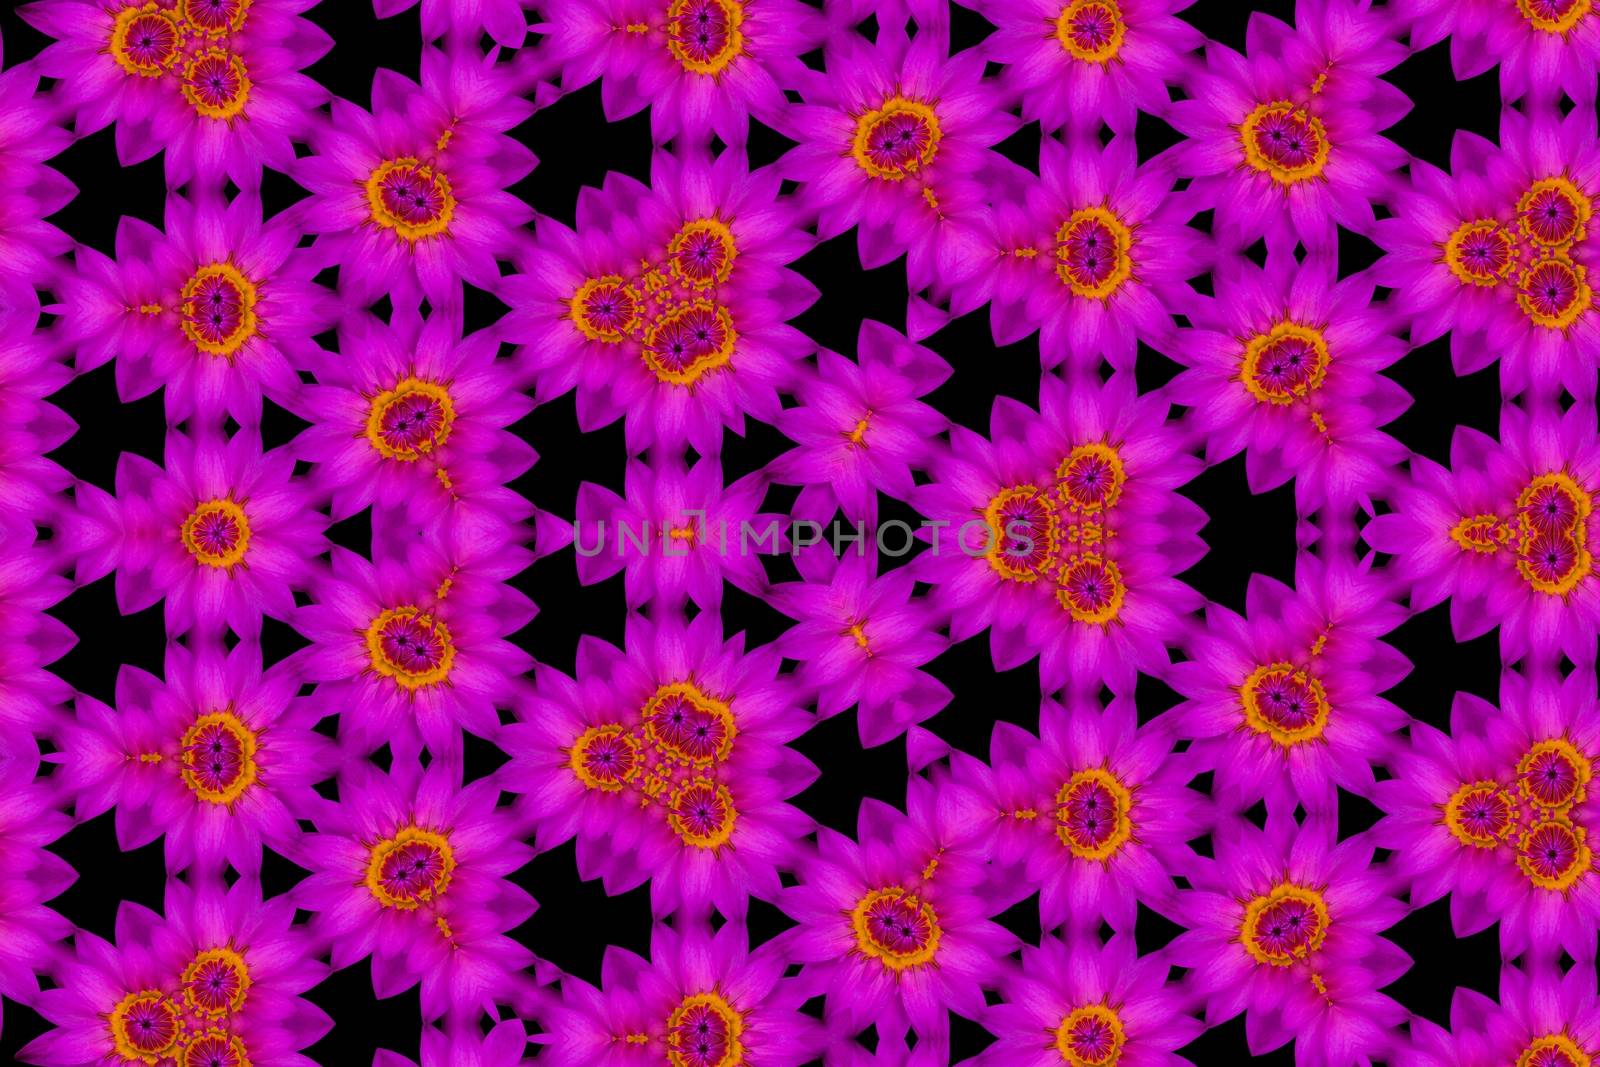 The Abstract reflection of Top view purple lotus and yellow pollen, kaleidoscope image